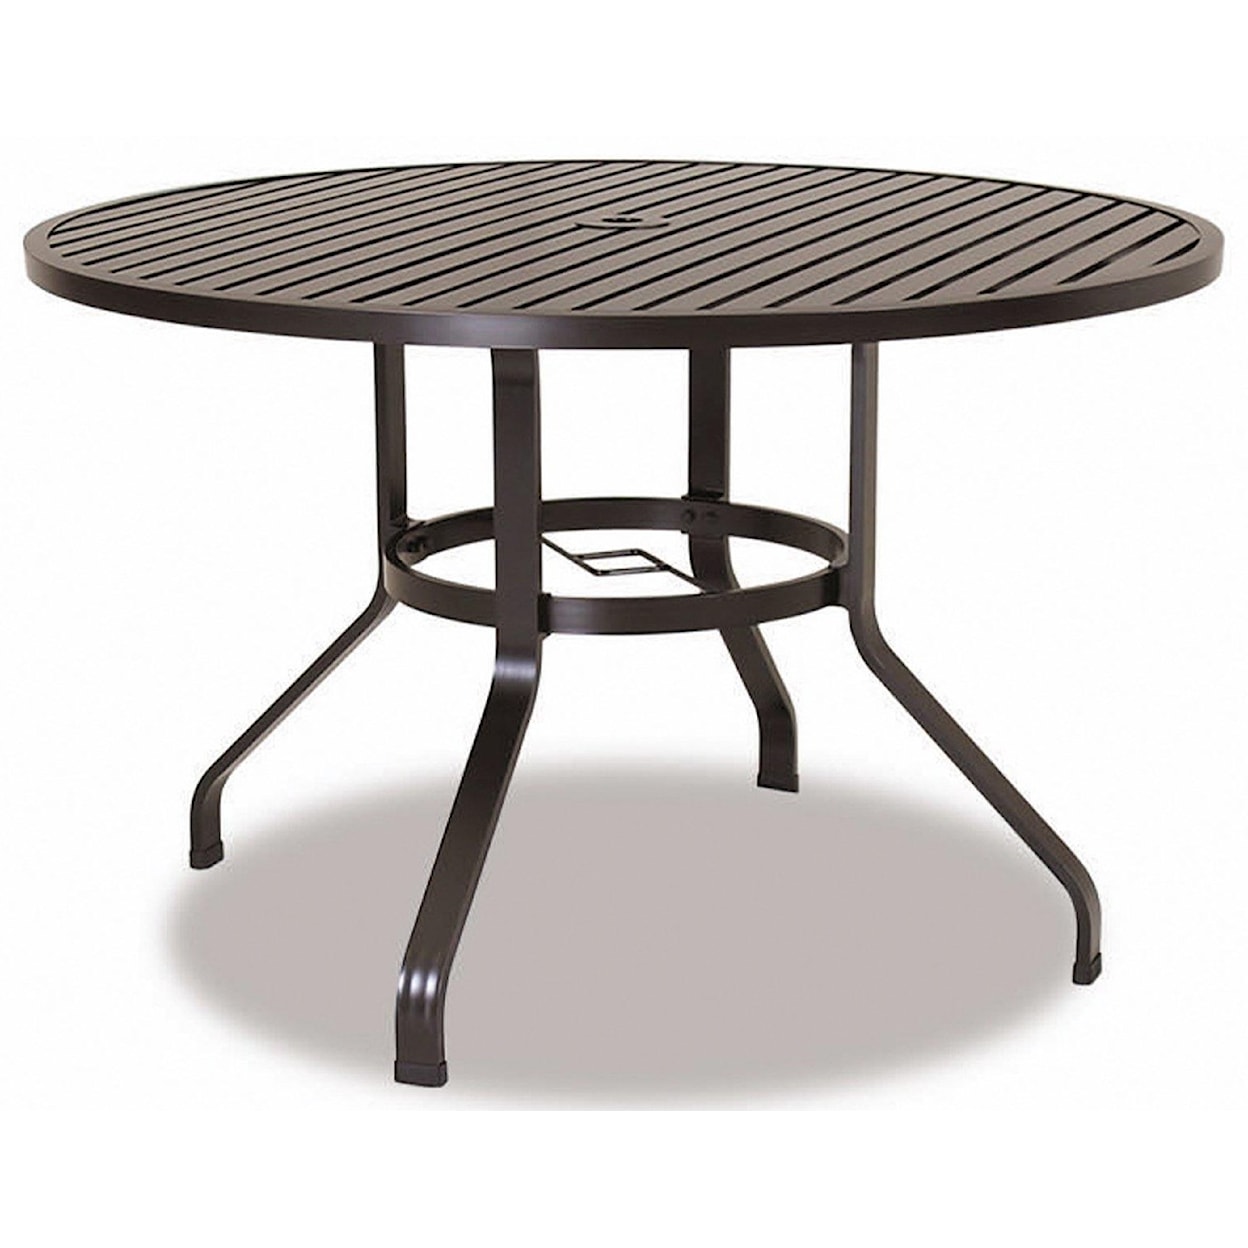 Sunset West La Jolla Outdoor Round Dining Table